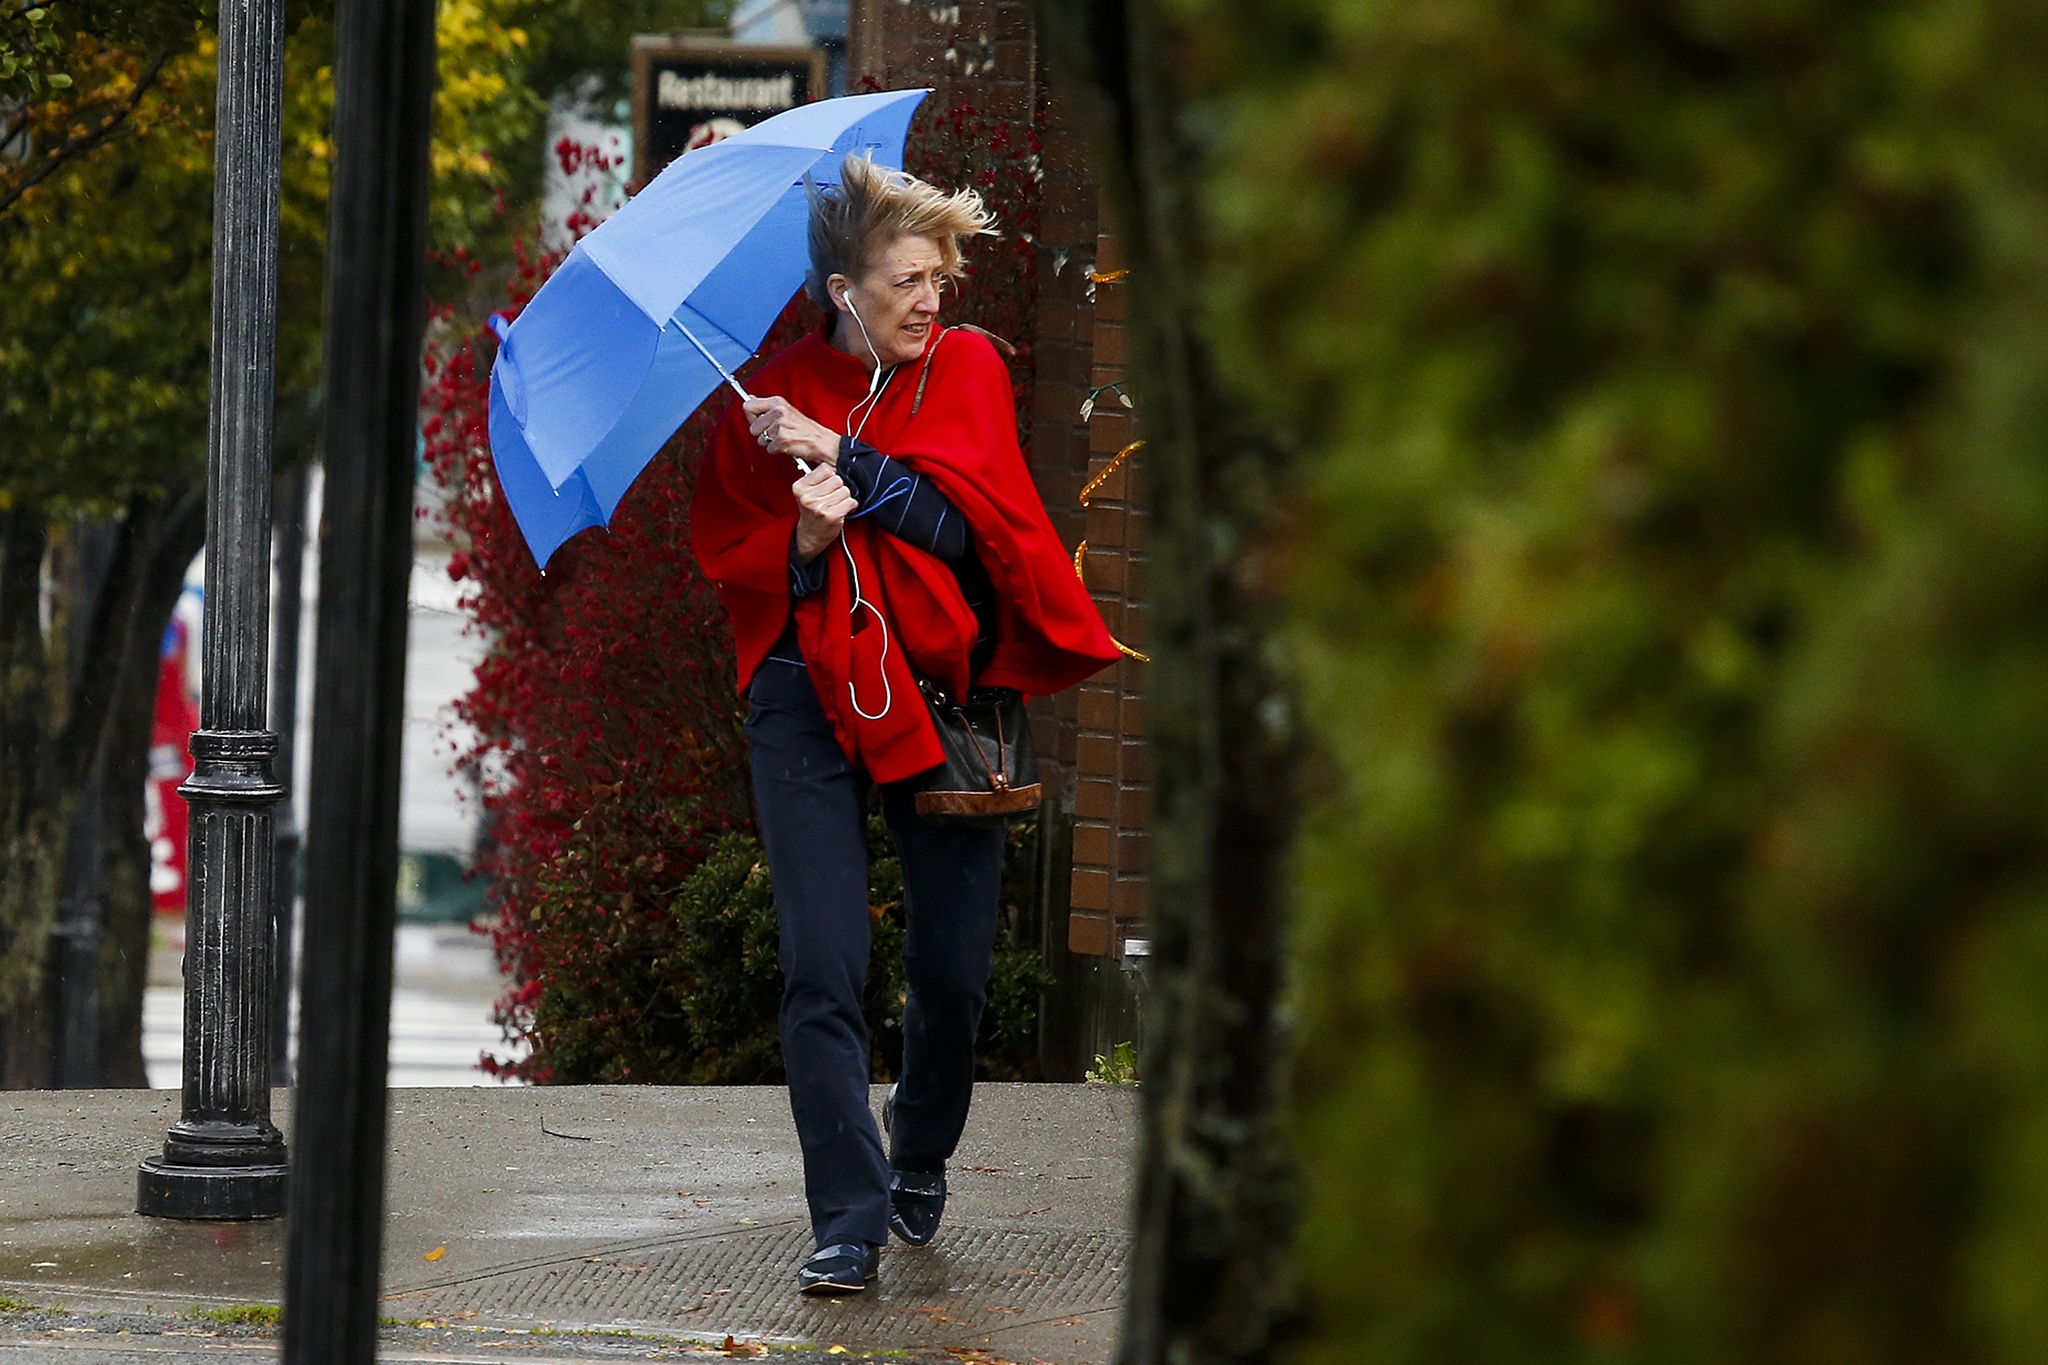 A pedestrian uses an umbrella to shield herself from the wind as she crosses 2nd Avenue North near Main Street in downtown Edmonds on Friday afternoon. (Ian Terry / The Herald)